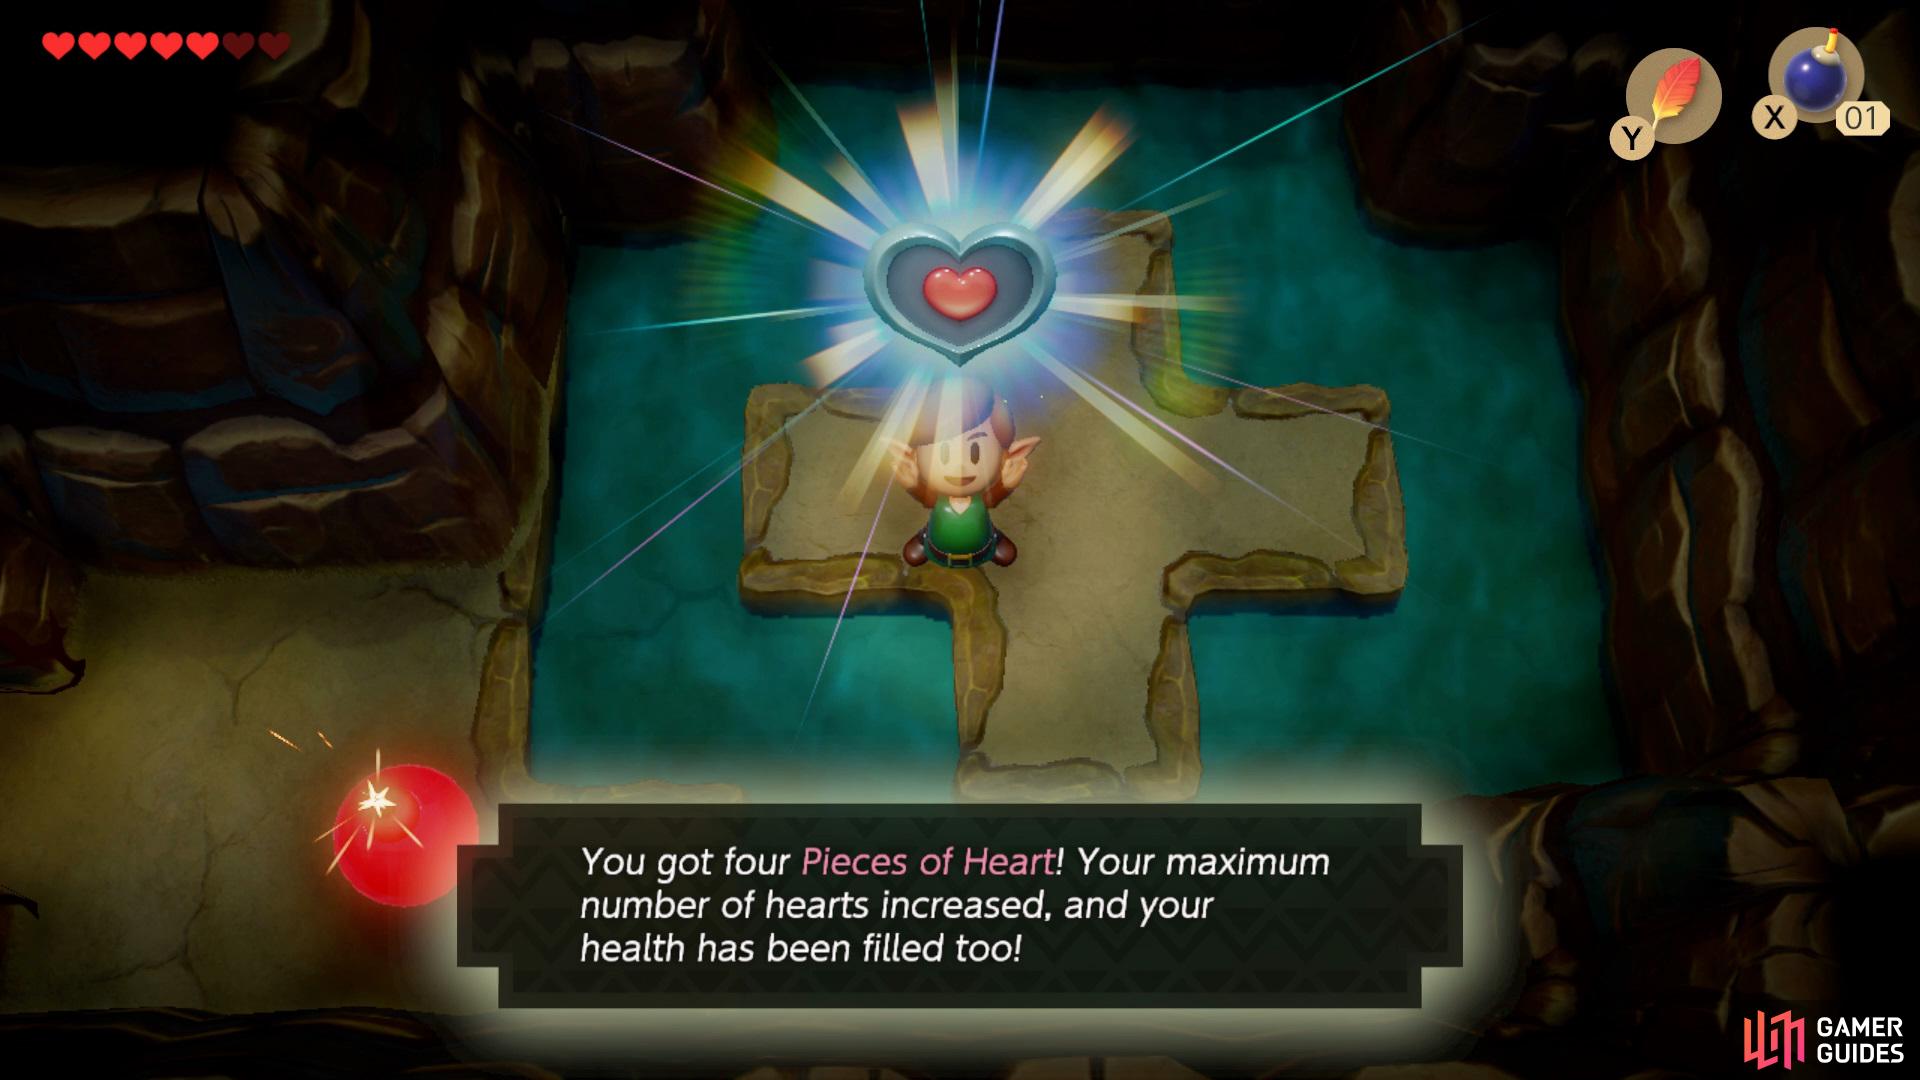 head inside the room and collect a Piece of Heart.